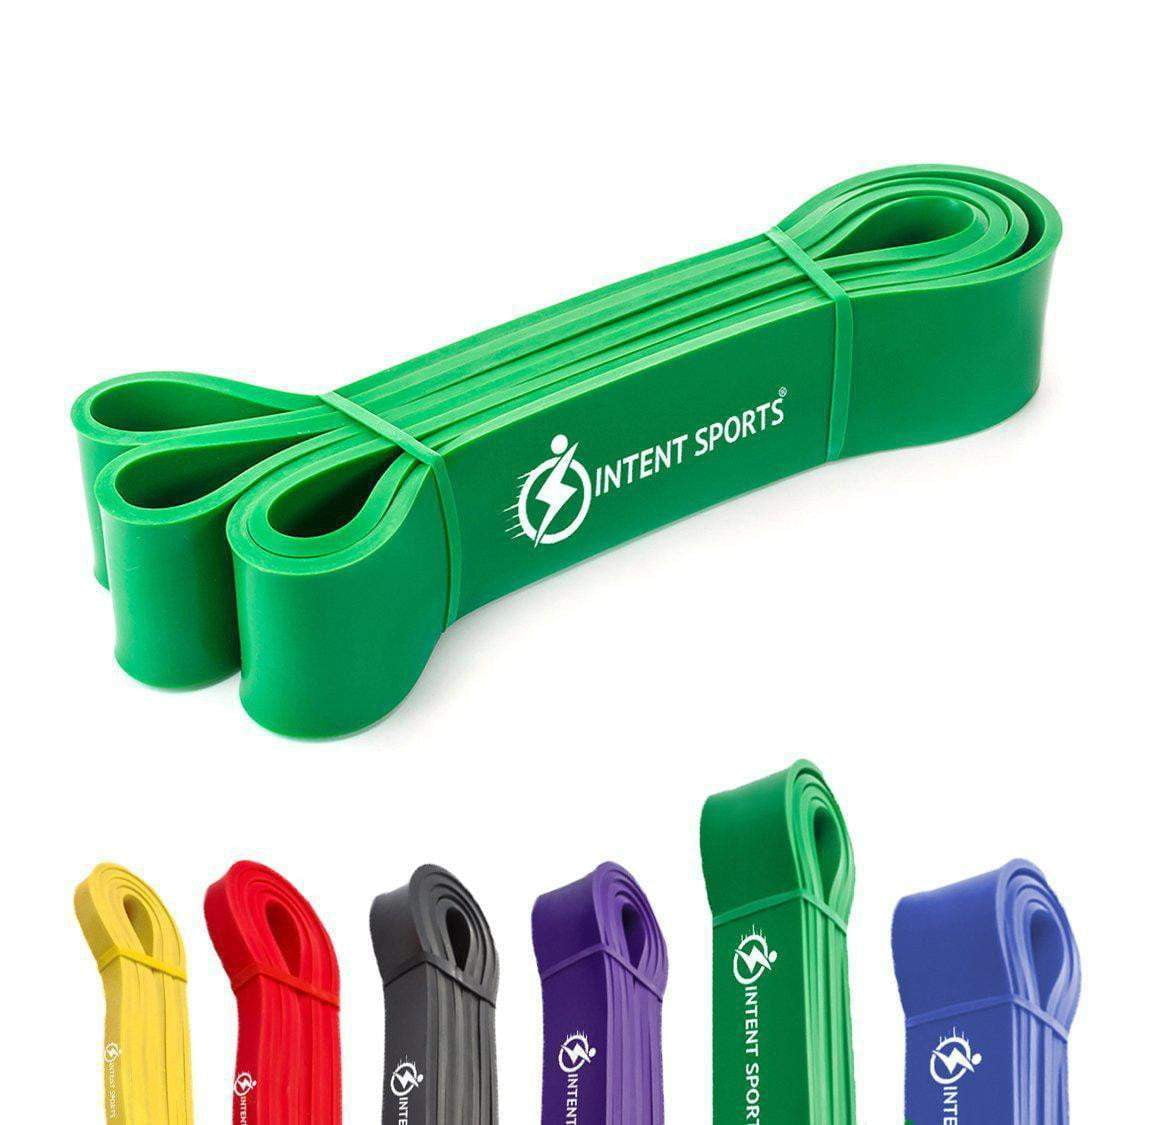 Pull Up Assist Bands - Single/Set - Intent Sports